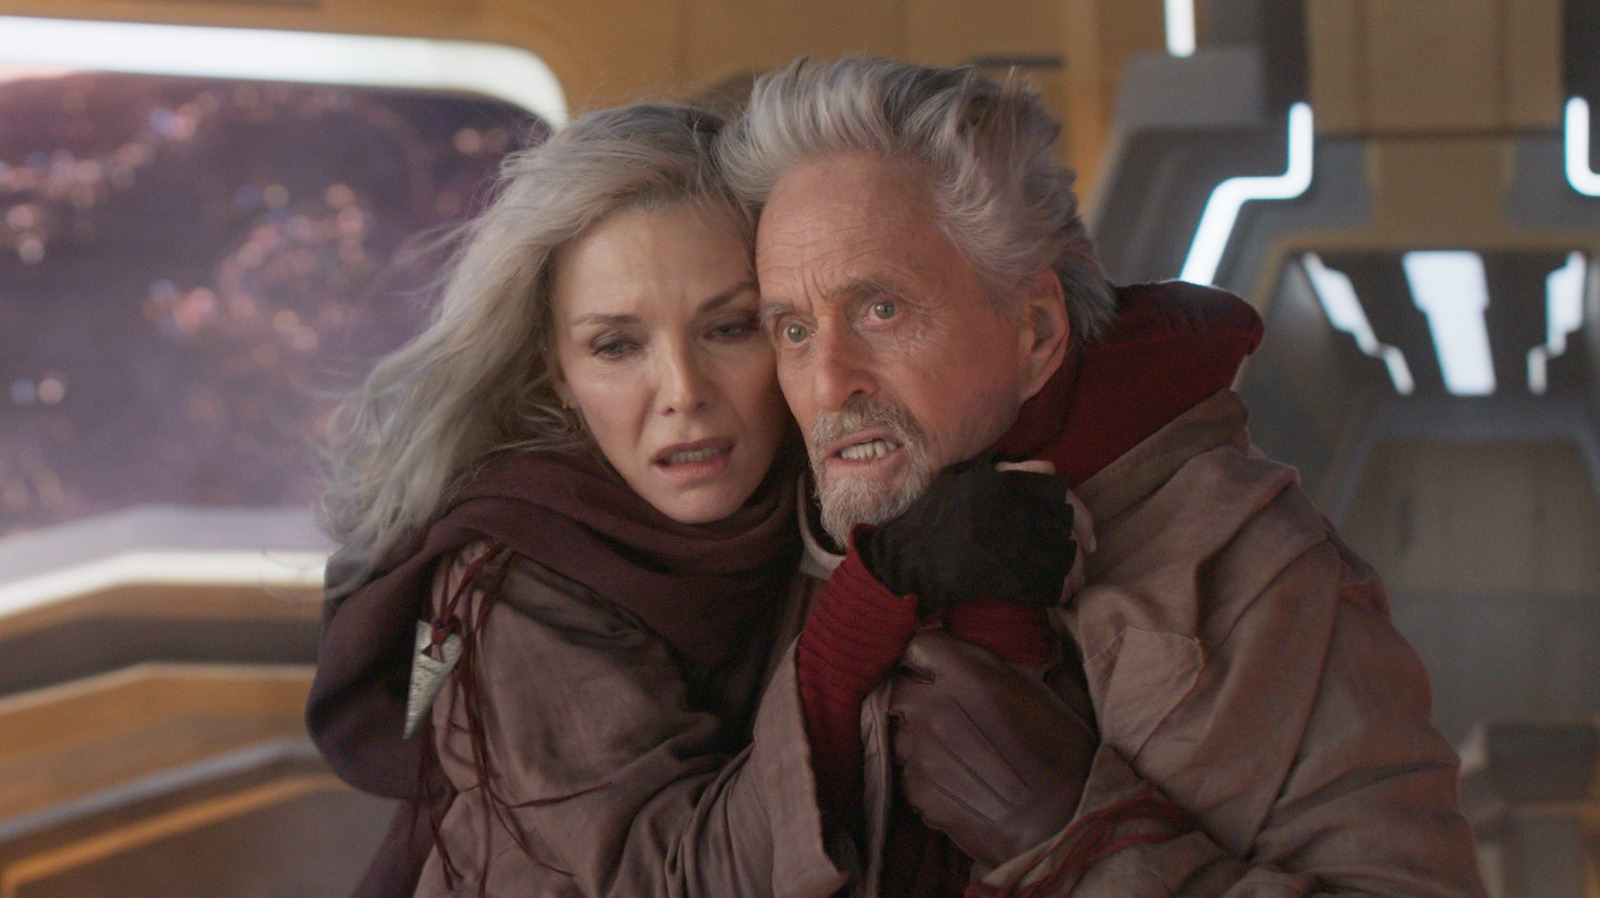 Michael Douglas Wanted Hank To Die In Ant-Man 3 And Pitched An Idea For His Demise